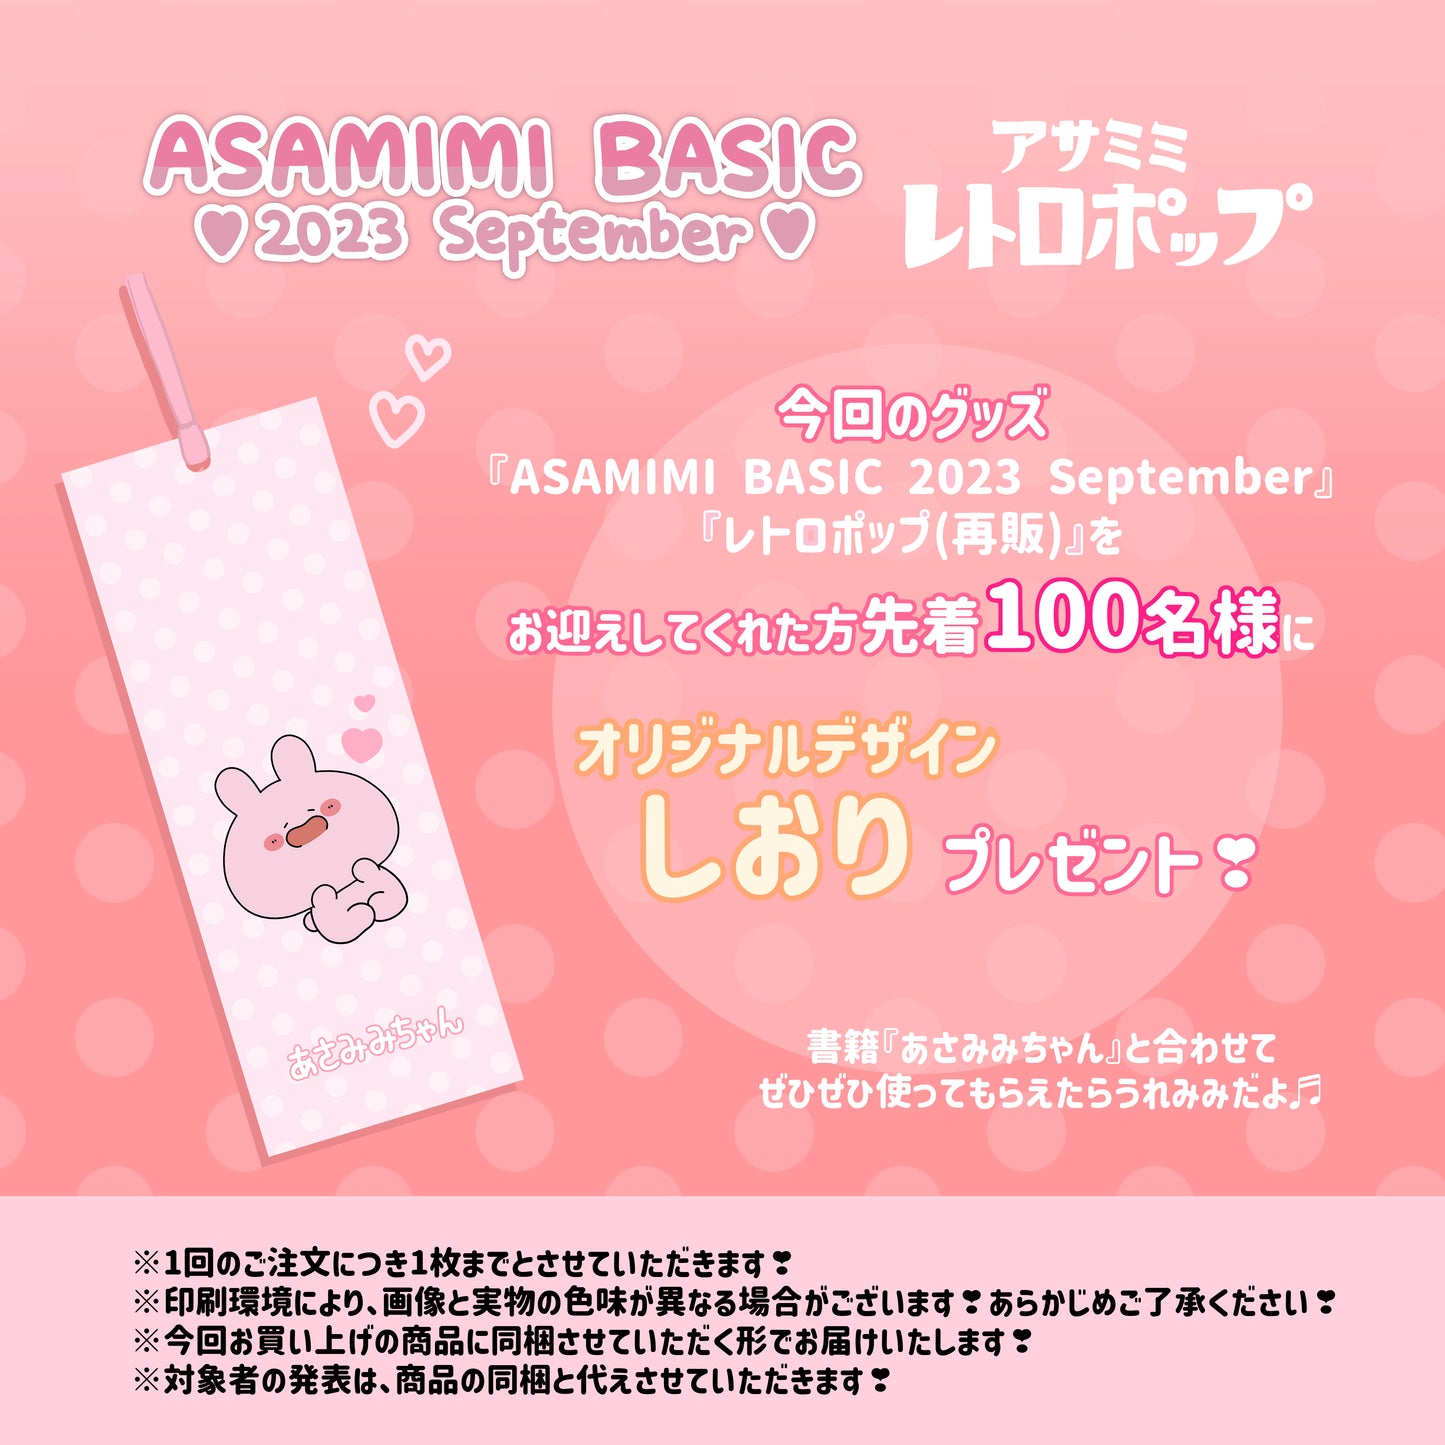 [Asamimi-chan] Holo sticker buried in pudding (ASAMIMI BASIC 2023 September) [Shipped in mid-November]